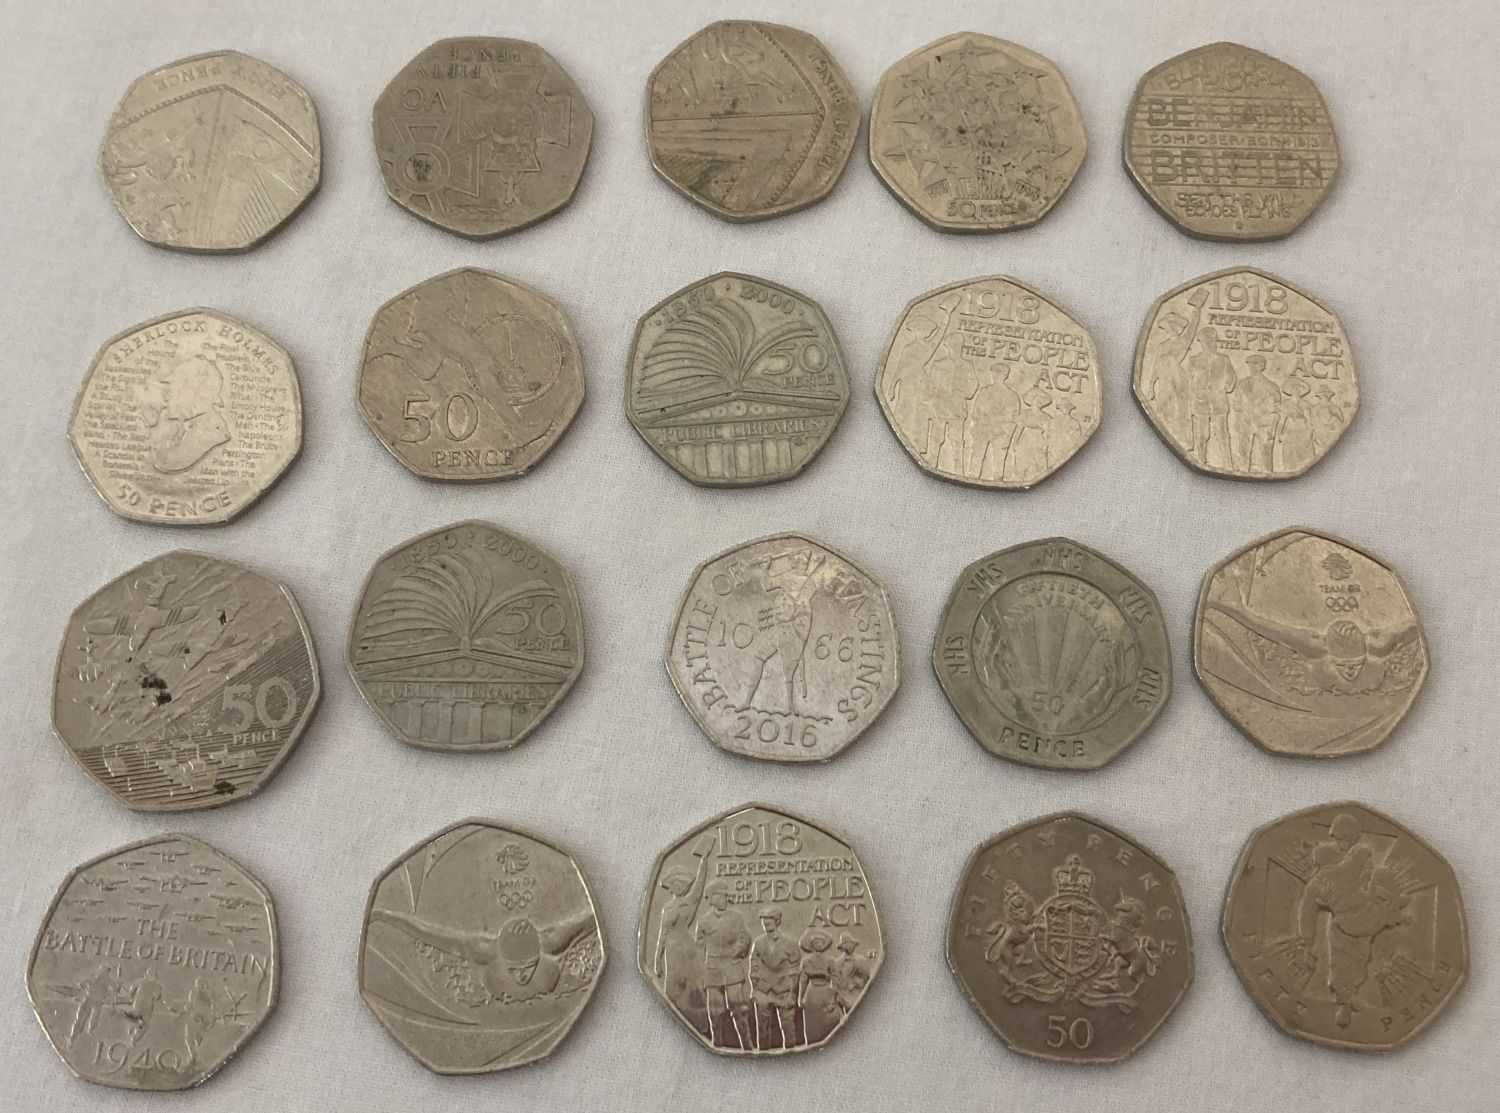 20 collectable commemorative 50p coins dating from 1994 -2019.